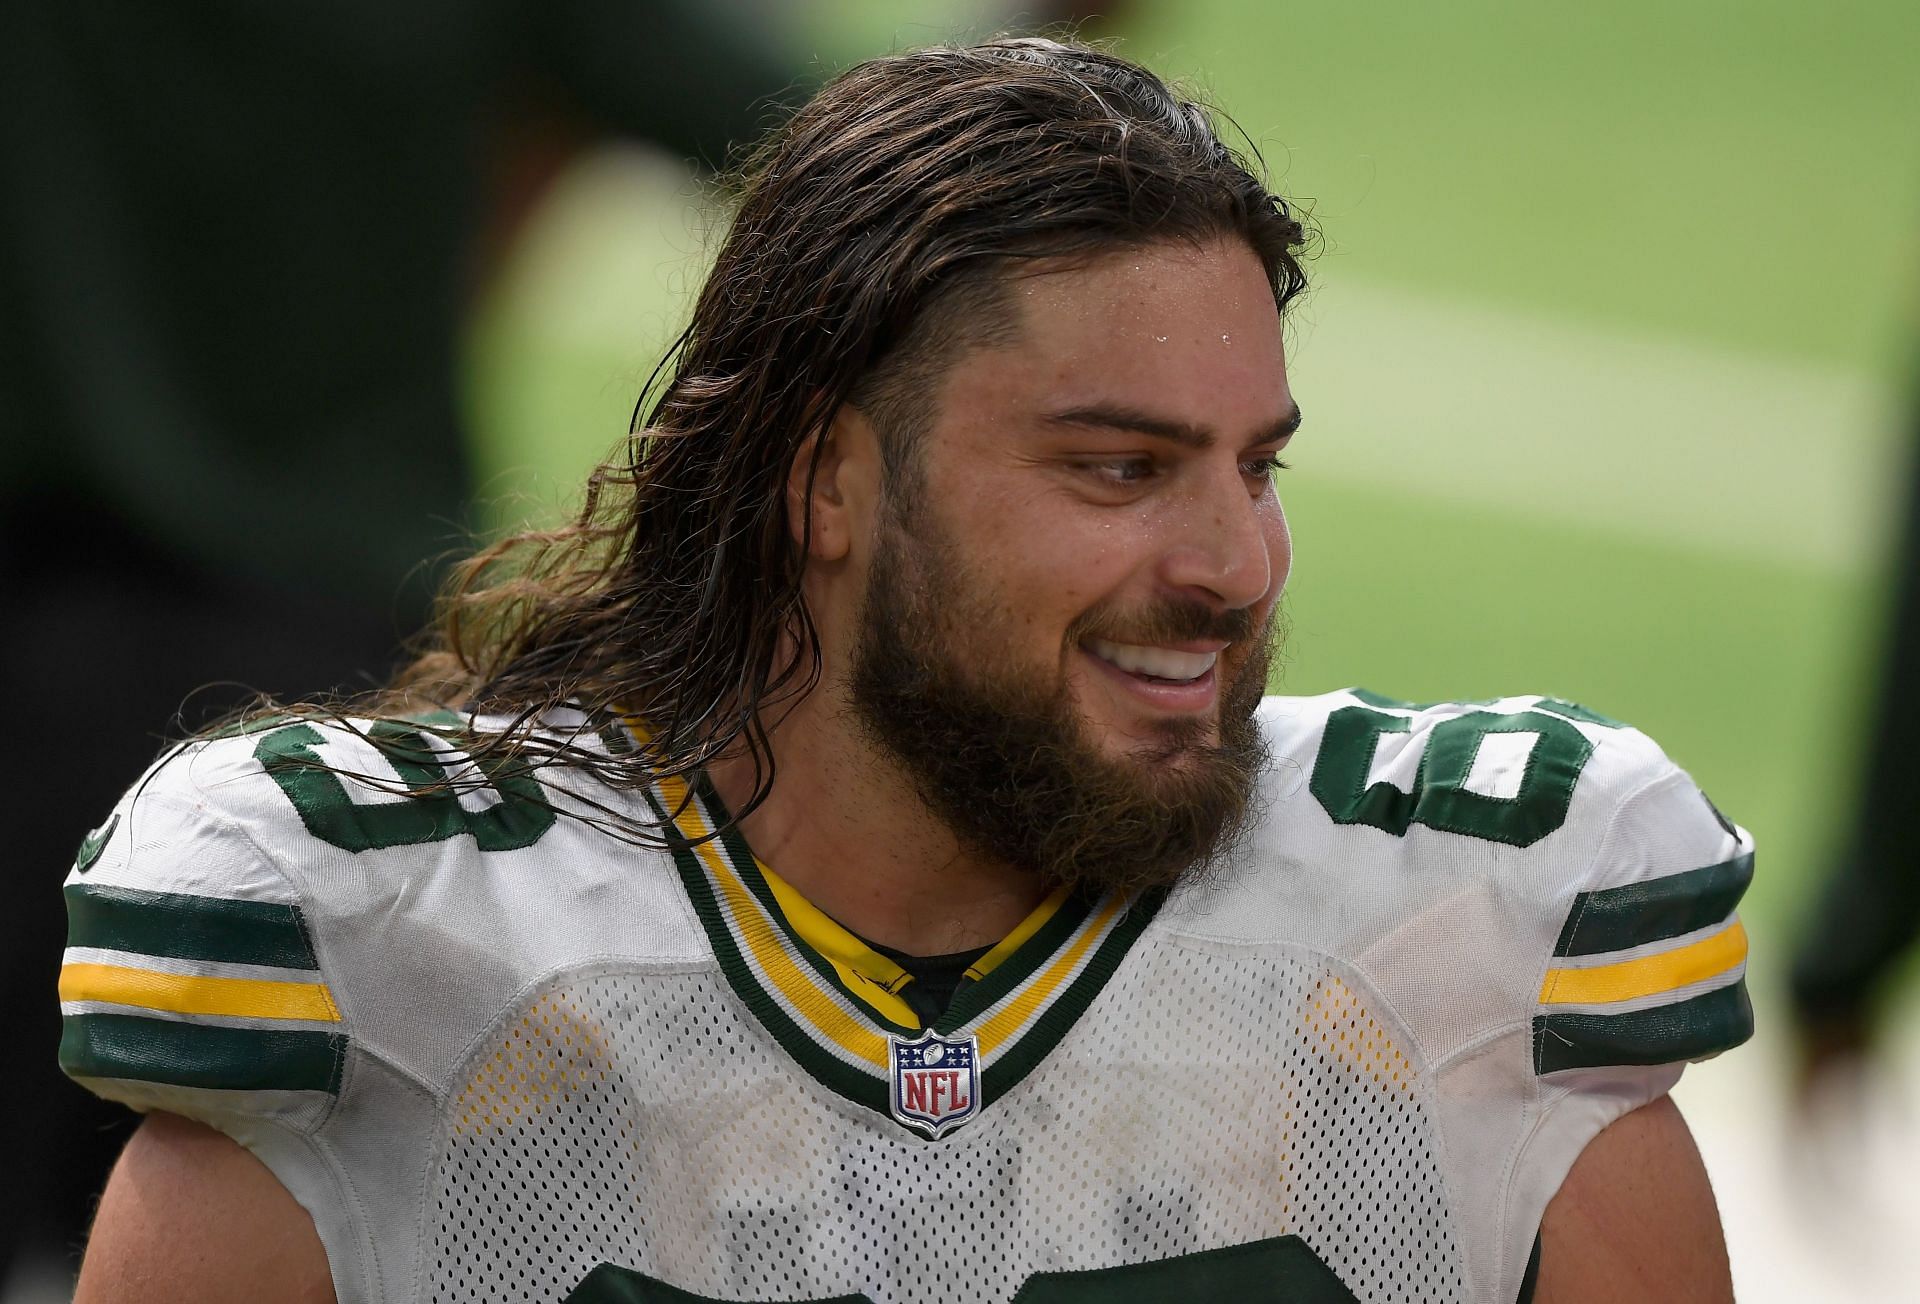 Green Bay Packers offensive Tackle David Bakhtiari is a beer-chugging machine